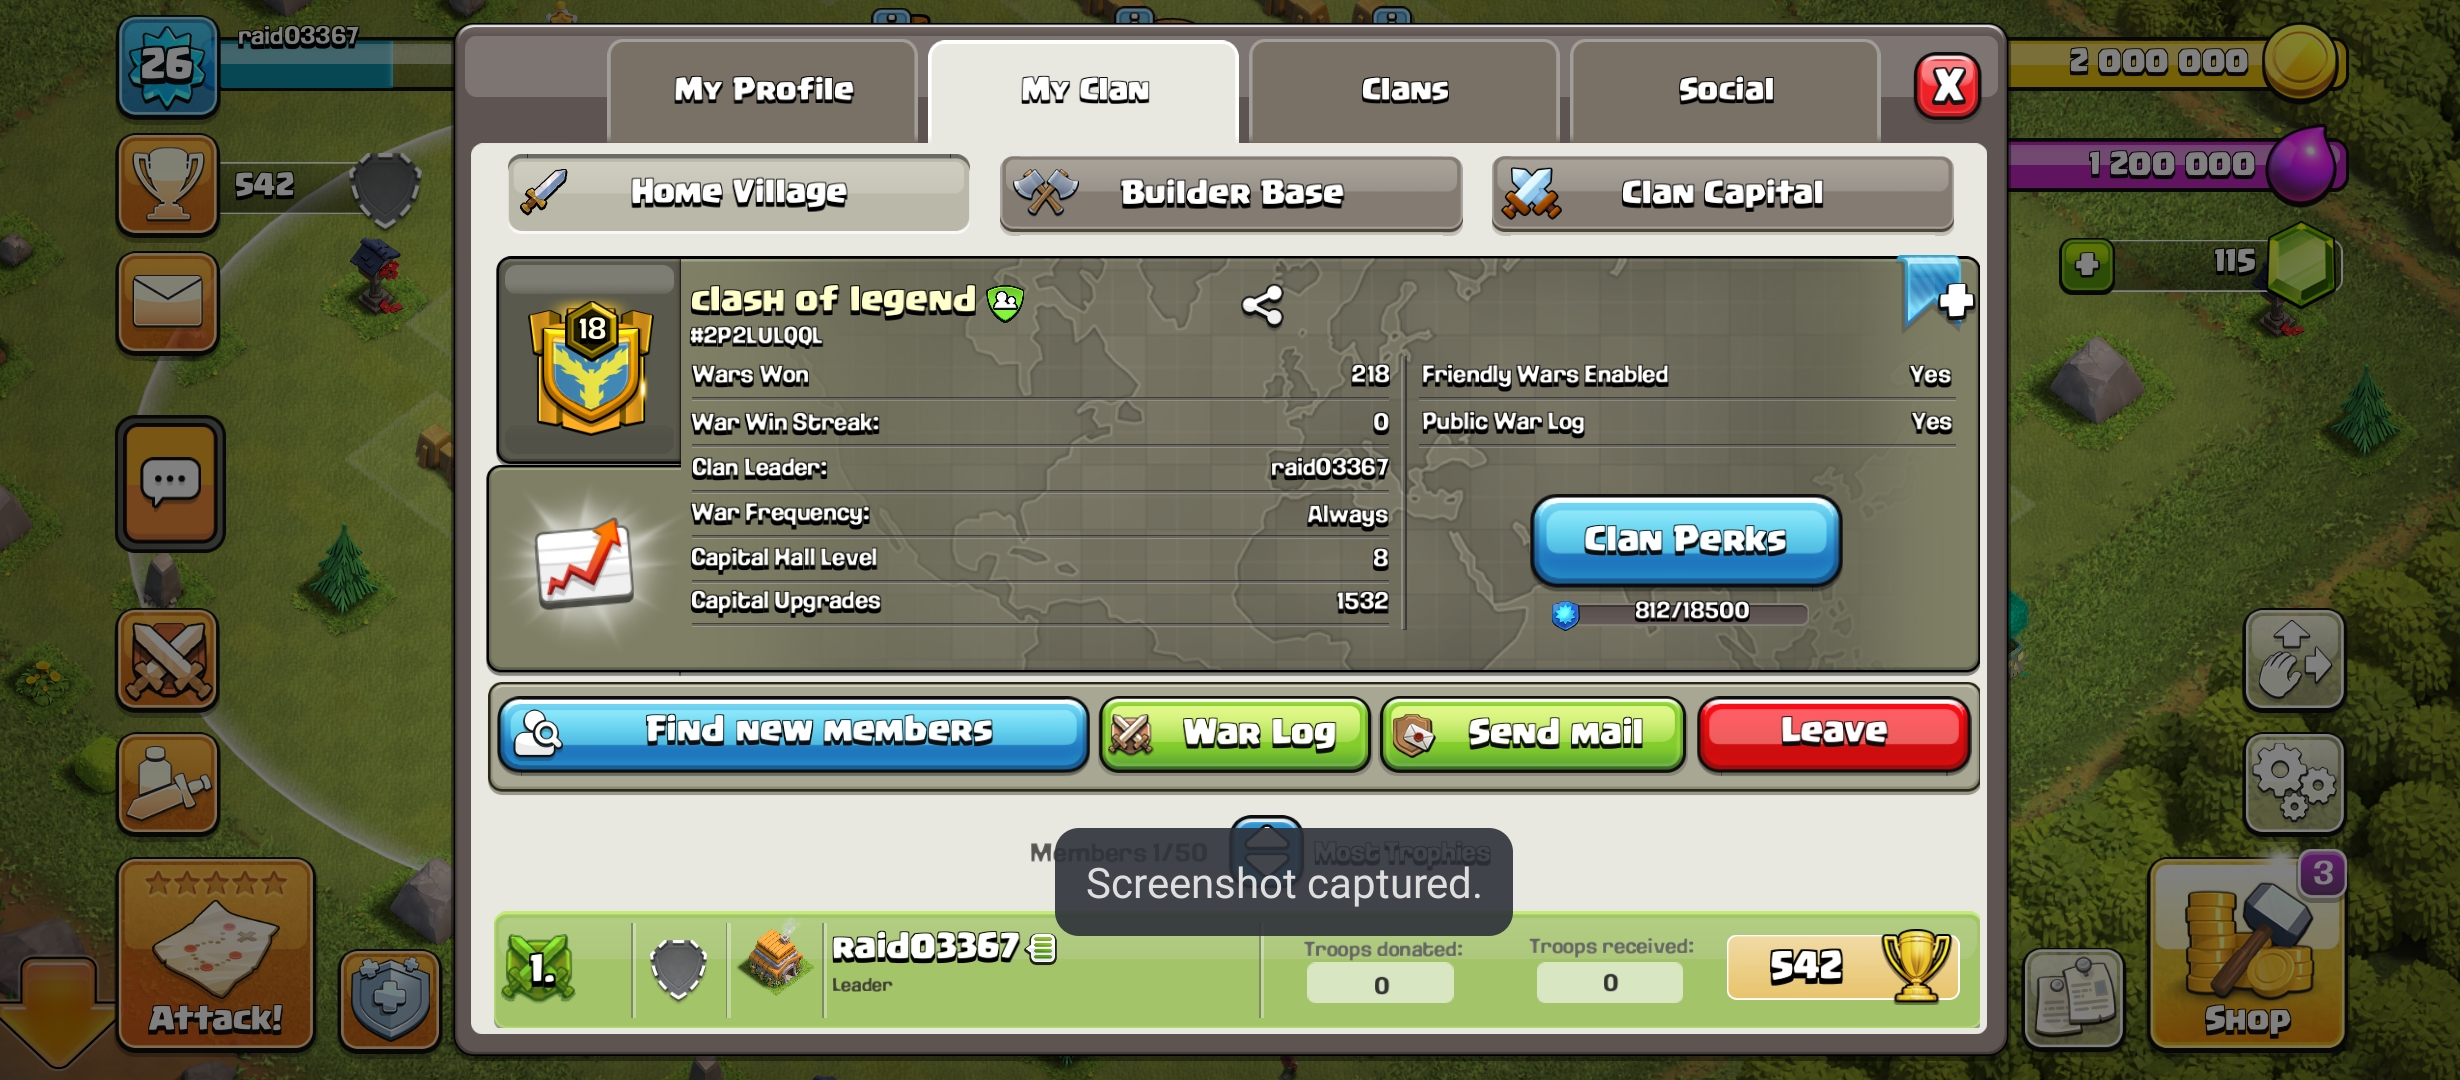  # CAPITAL HALL  8 ( upgradeable to CH 9 )# | Level 18 | Name : clash of legend | W 218 , 181  |  League : GOLD 2